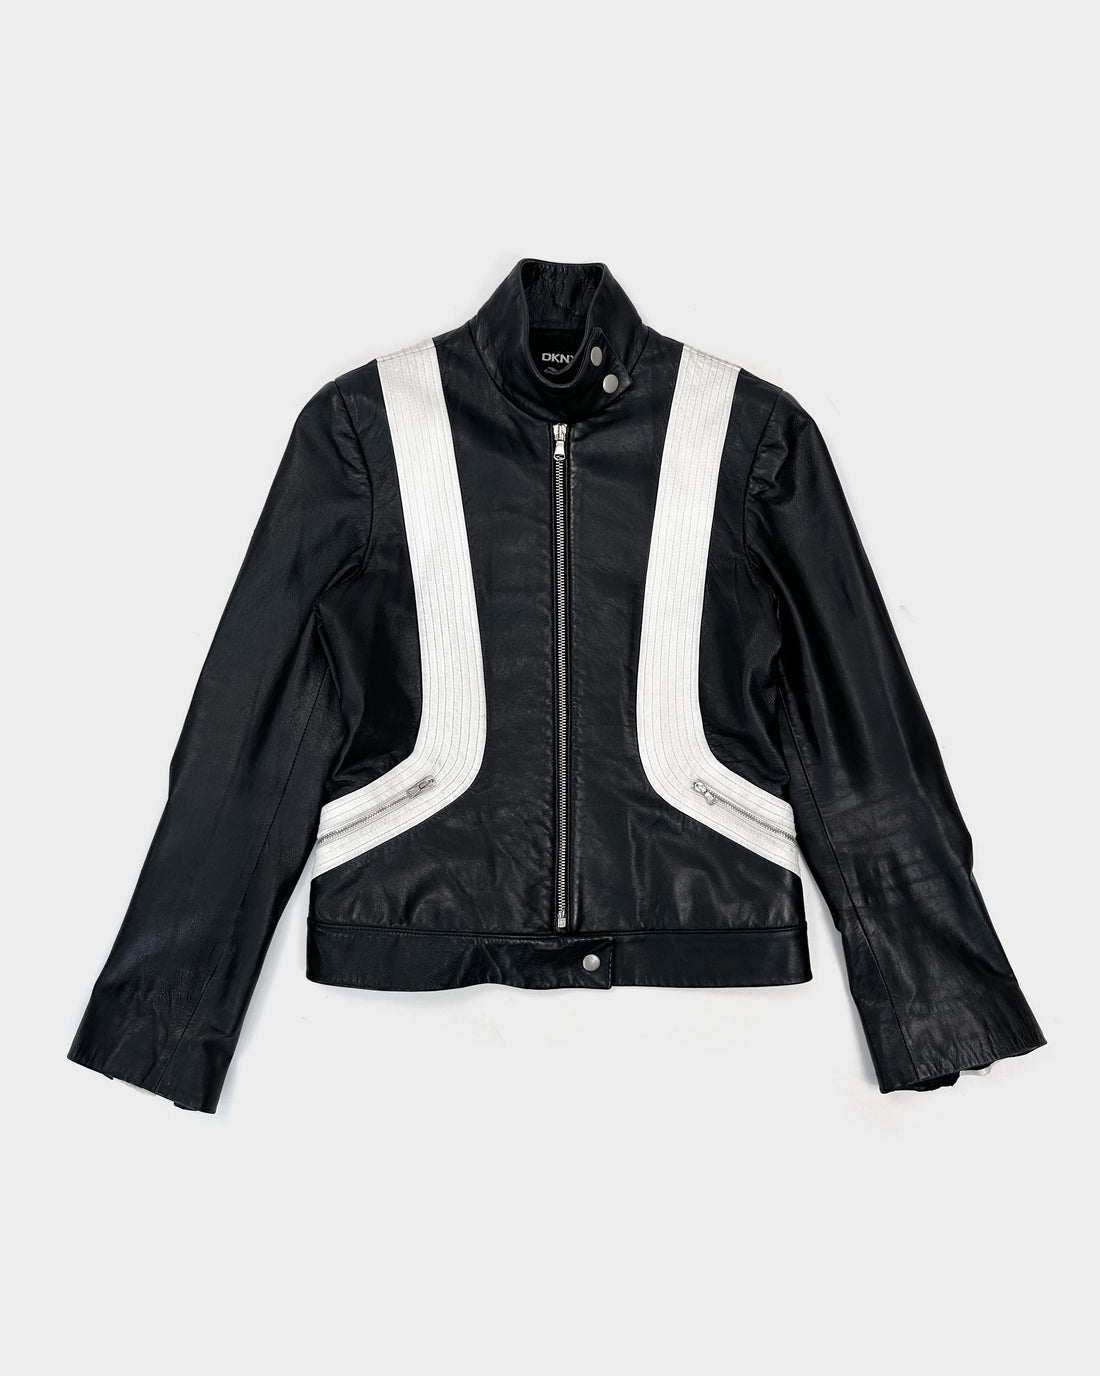 DKNY Black Racing Leather Cropped Jacket 1990's